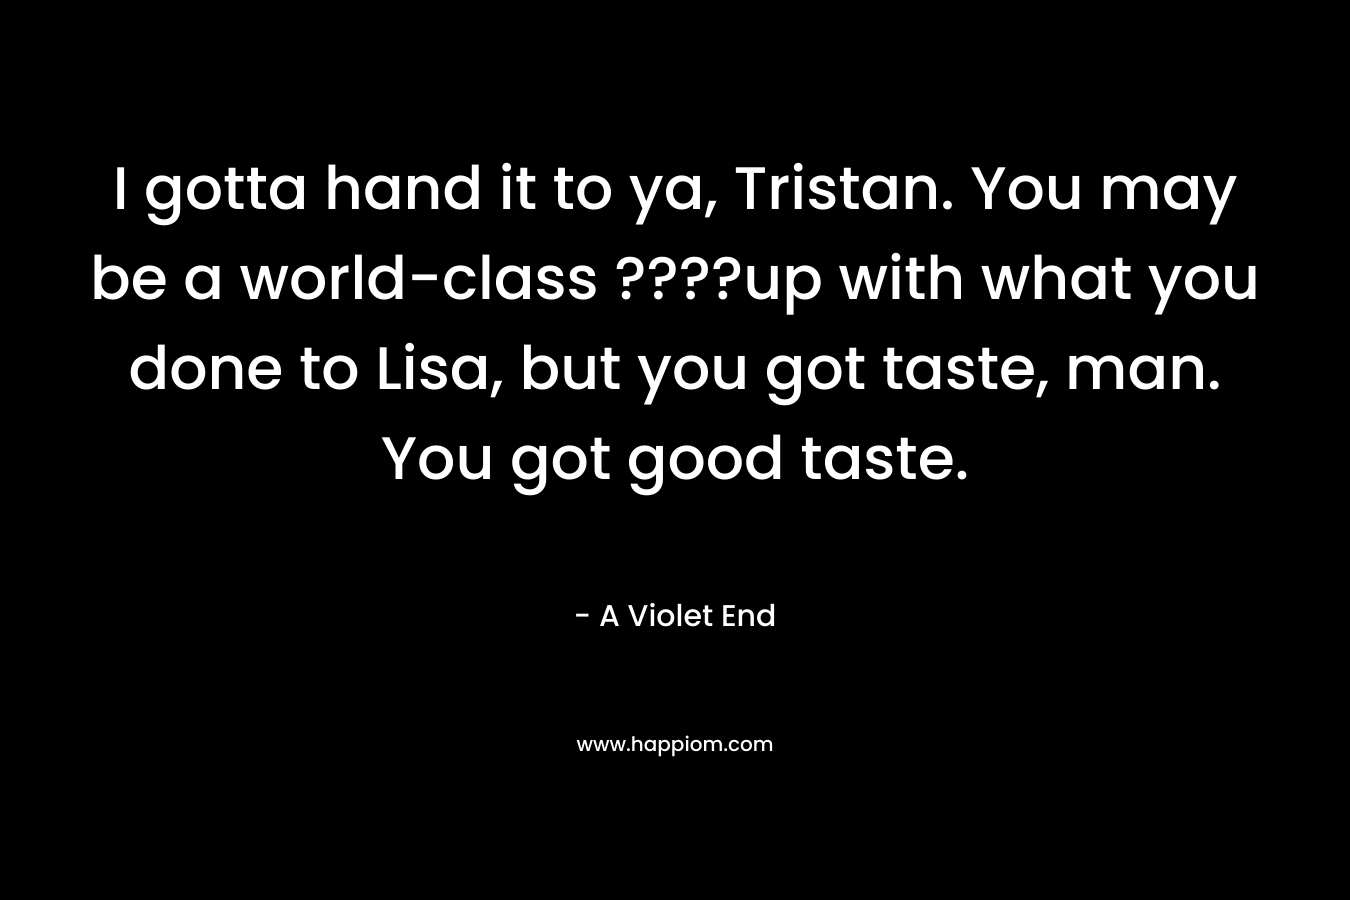 I gotta hand it to ya, Tristan. You may be a world-class ????up with what you done to Lisa, but you got taste, man. You got good taste.